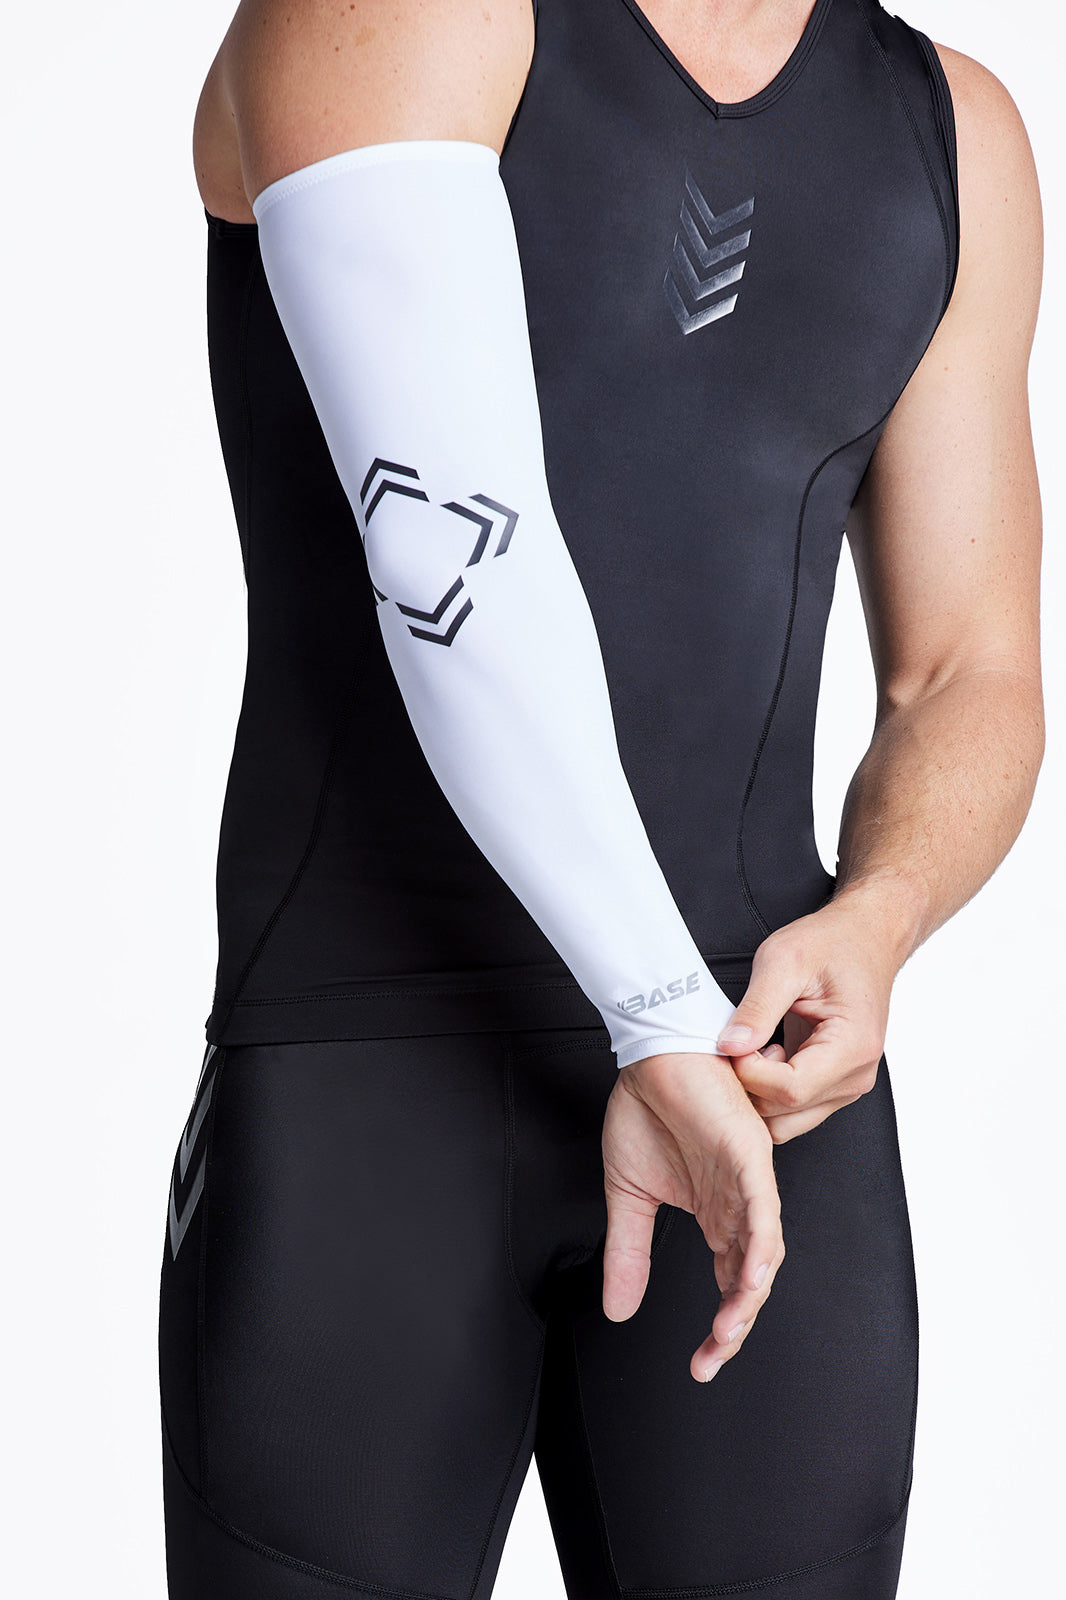 BASE Compression Arm Sleeve (Pair)